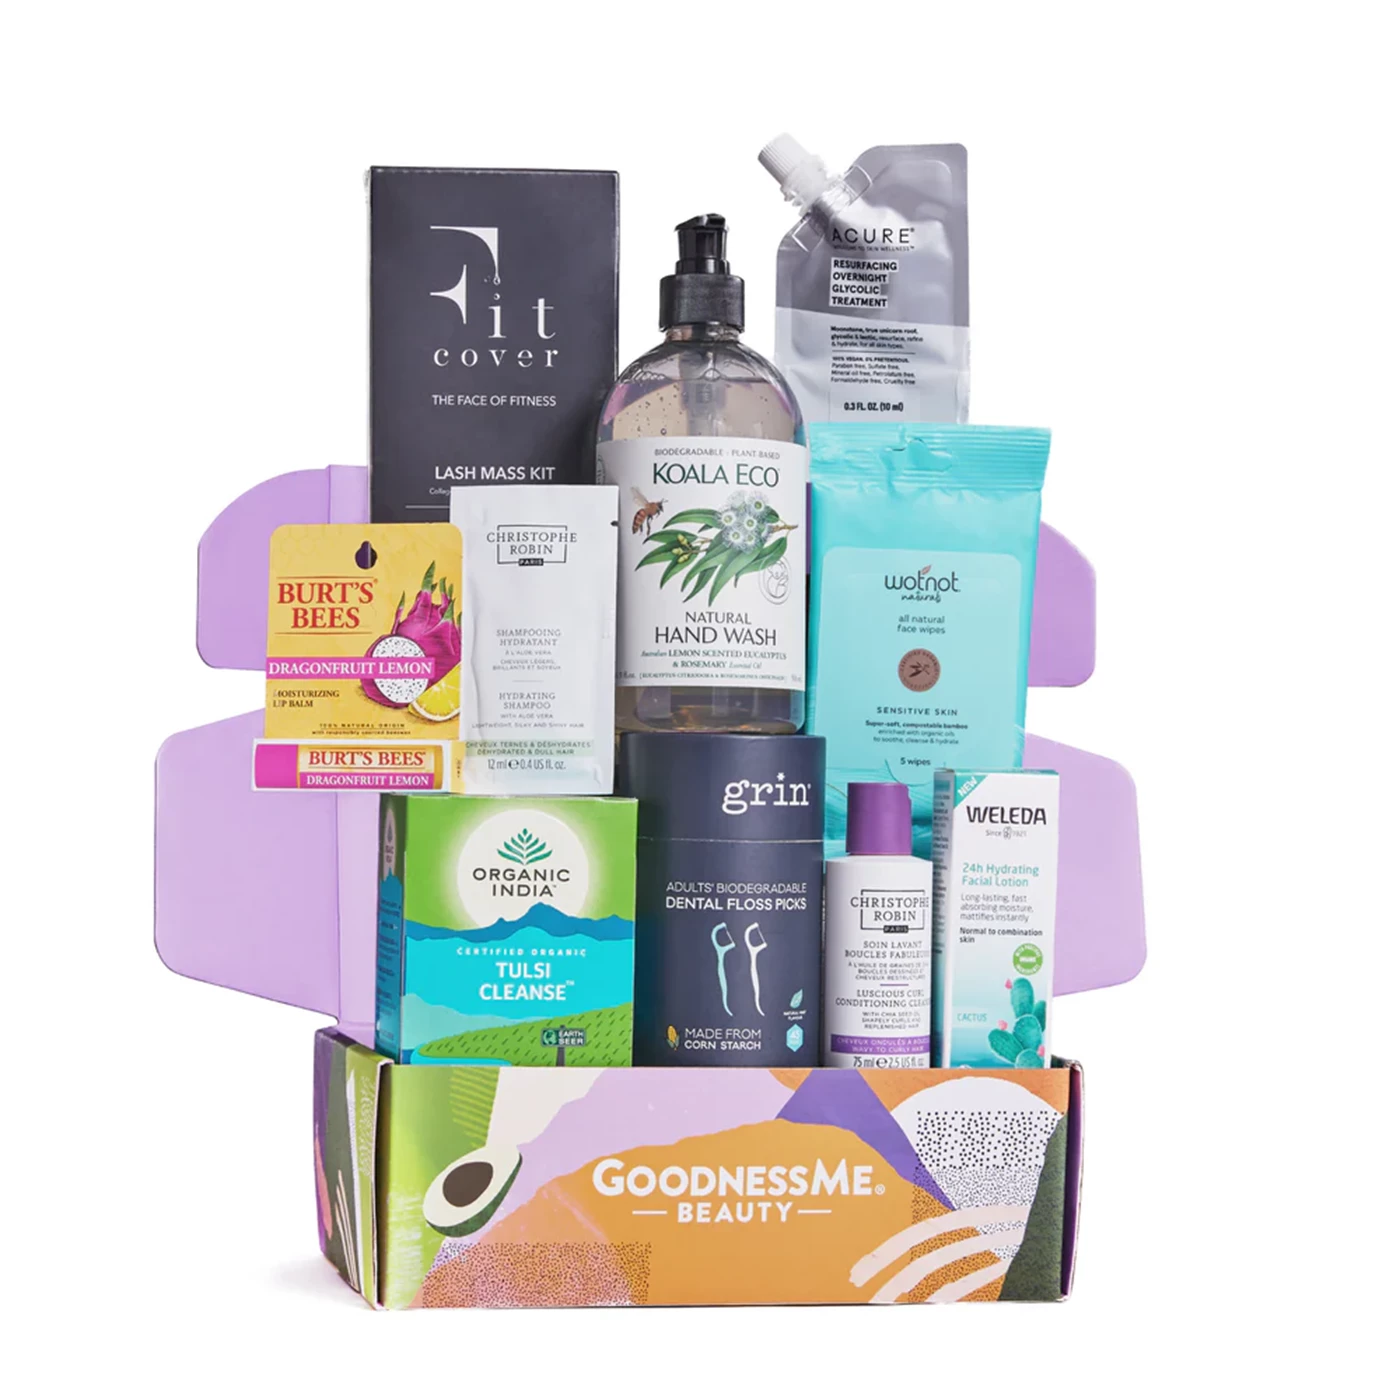 A Goodness Me Beauty box, packed with goodies including hand wash, lip balm and face masks.